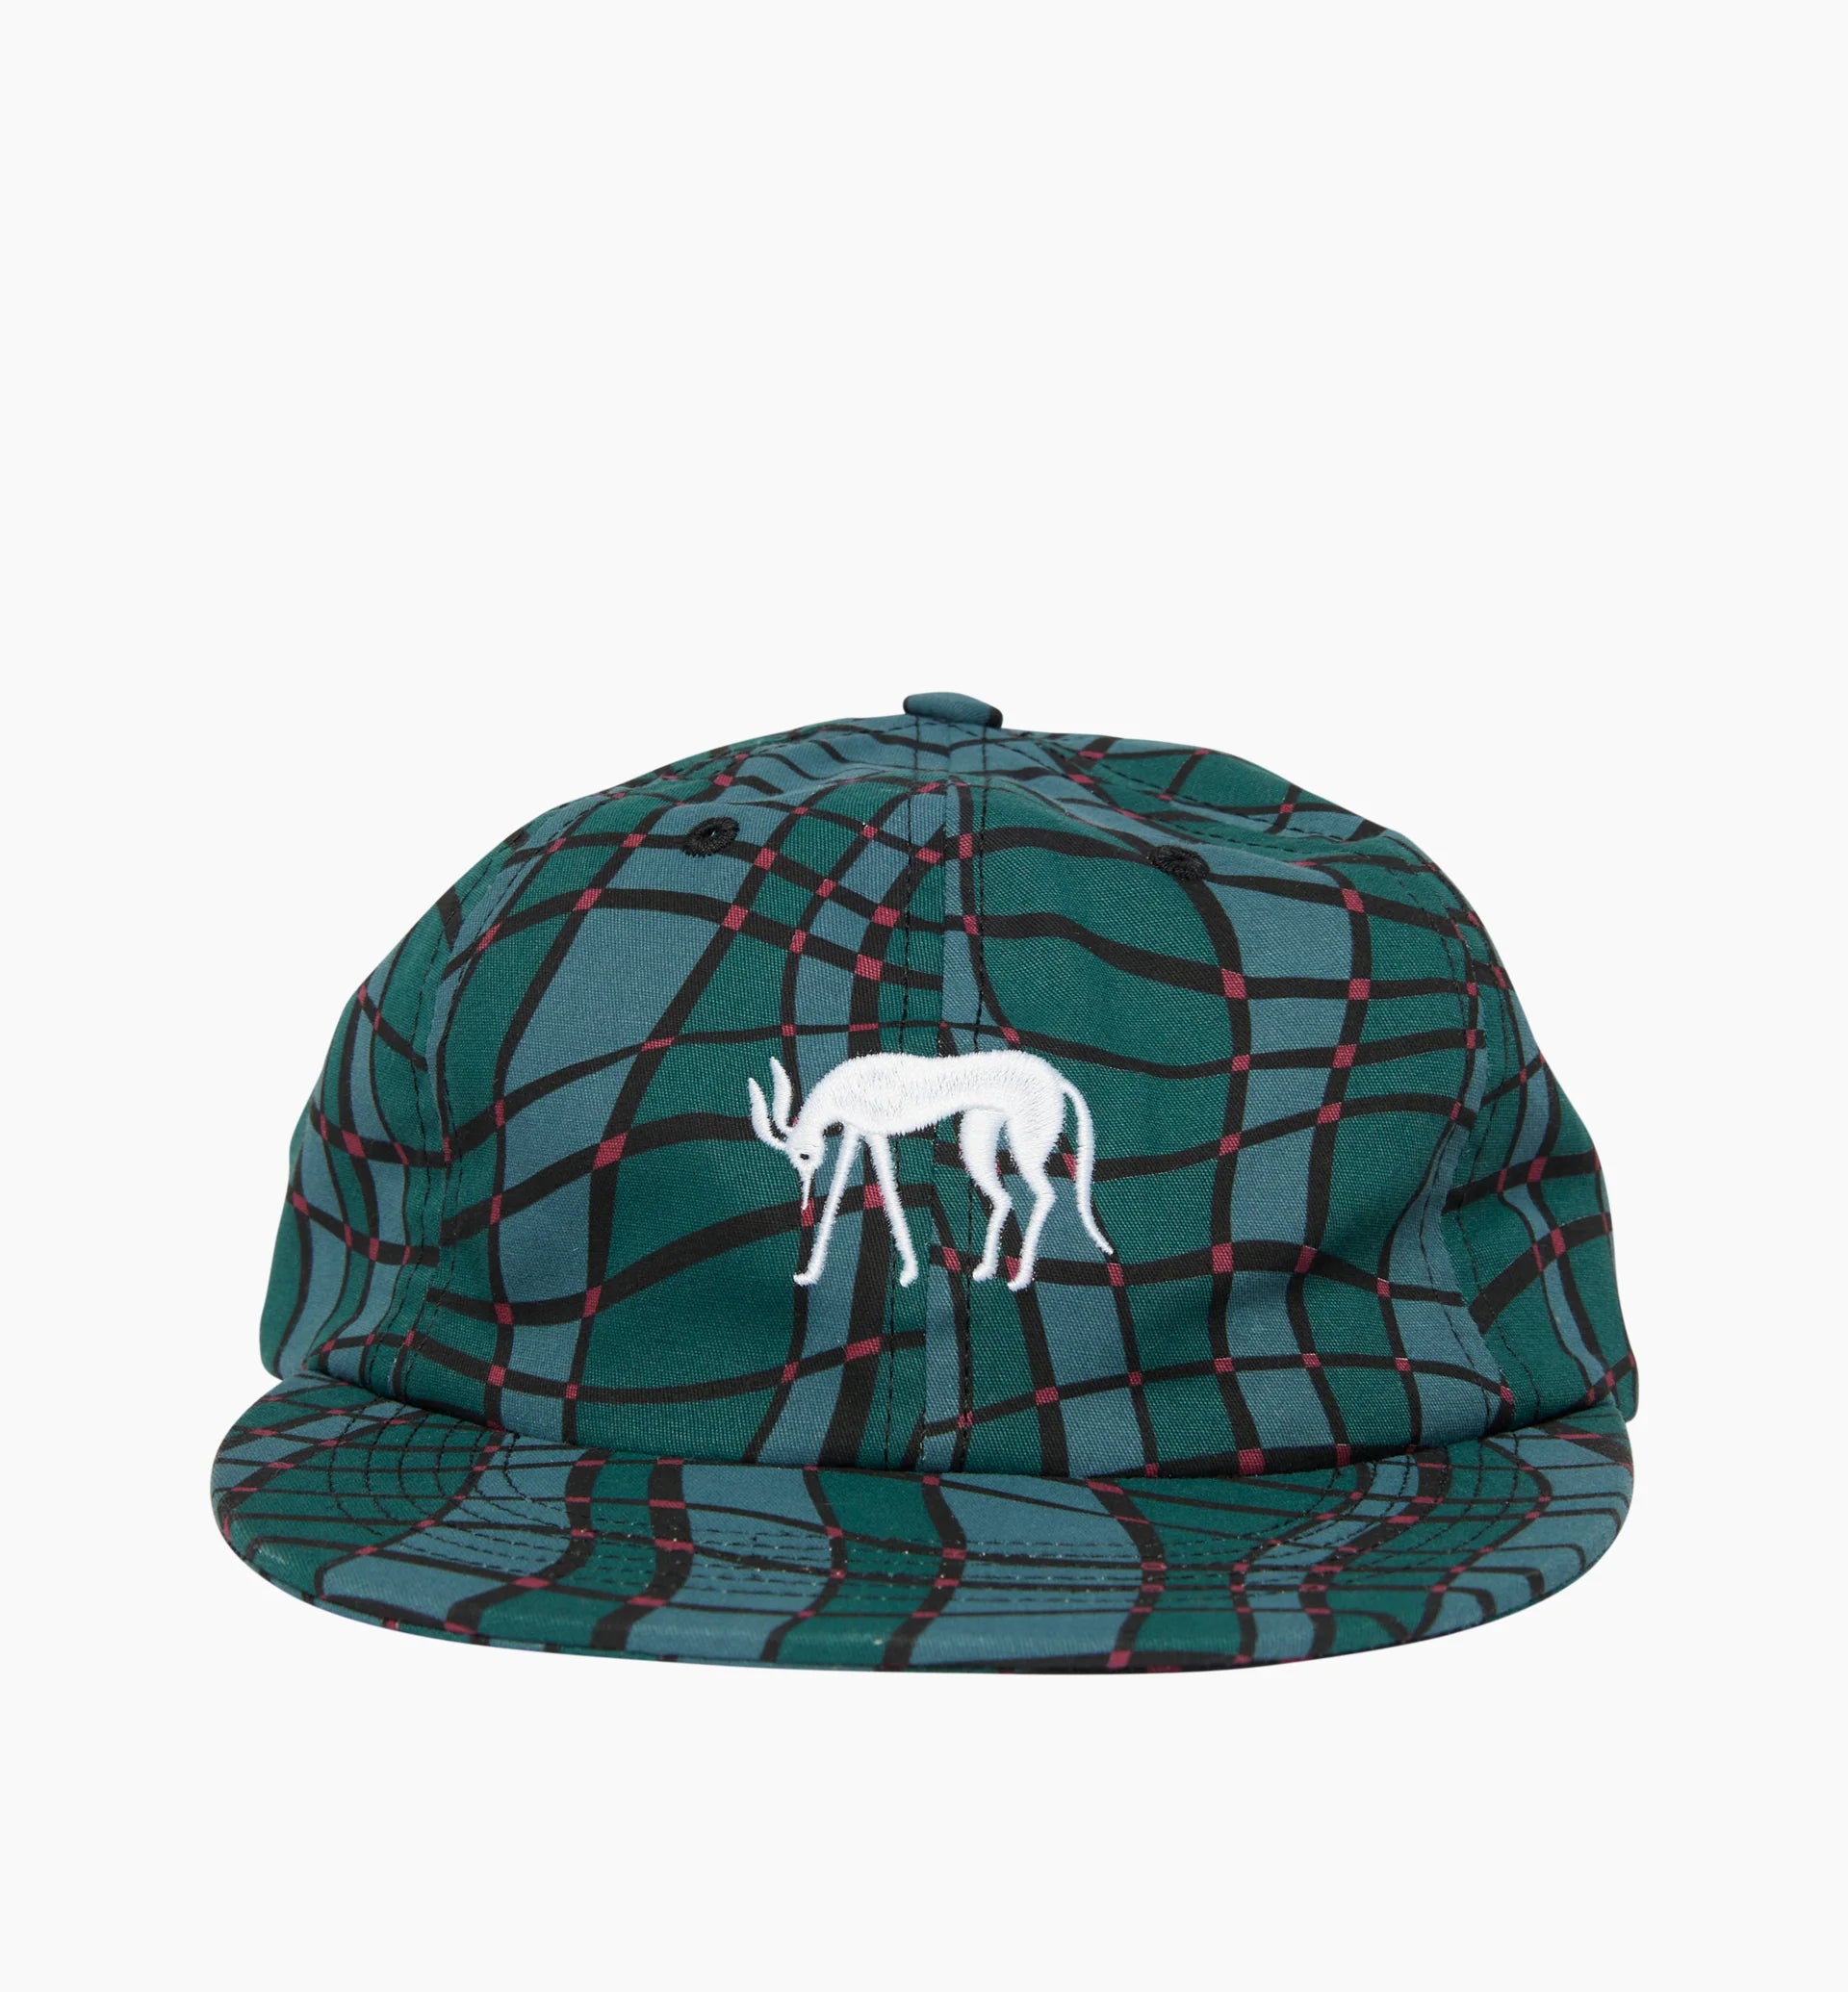 BY PARRA Squared Waves Pattern 6 Panel Hat LEO BOUTIQUE